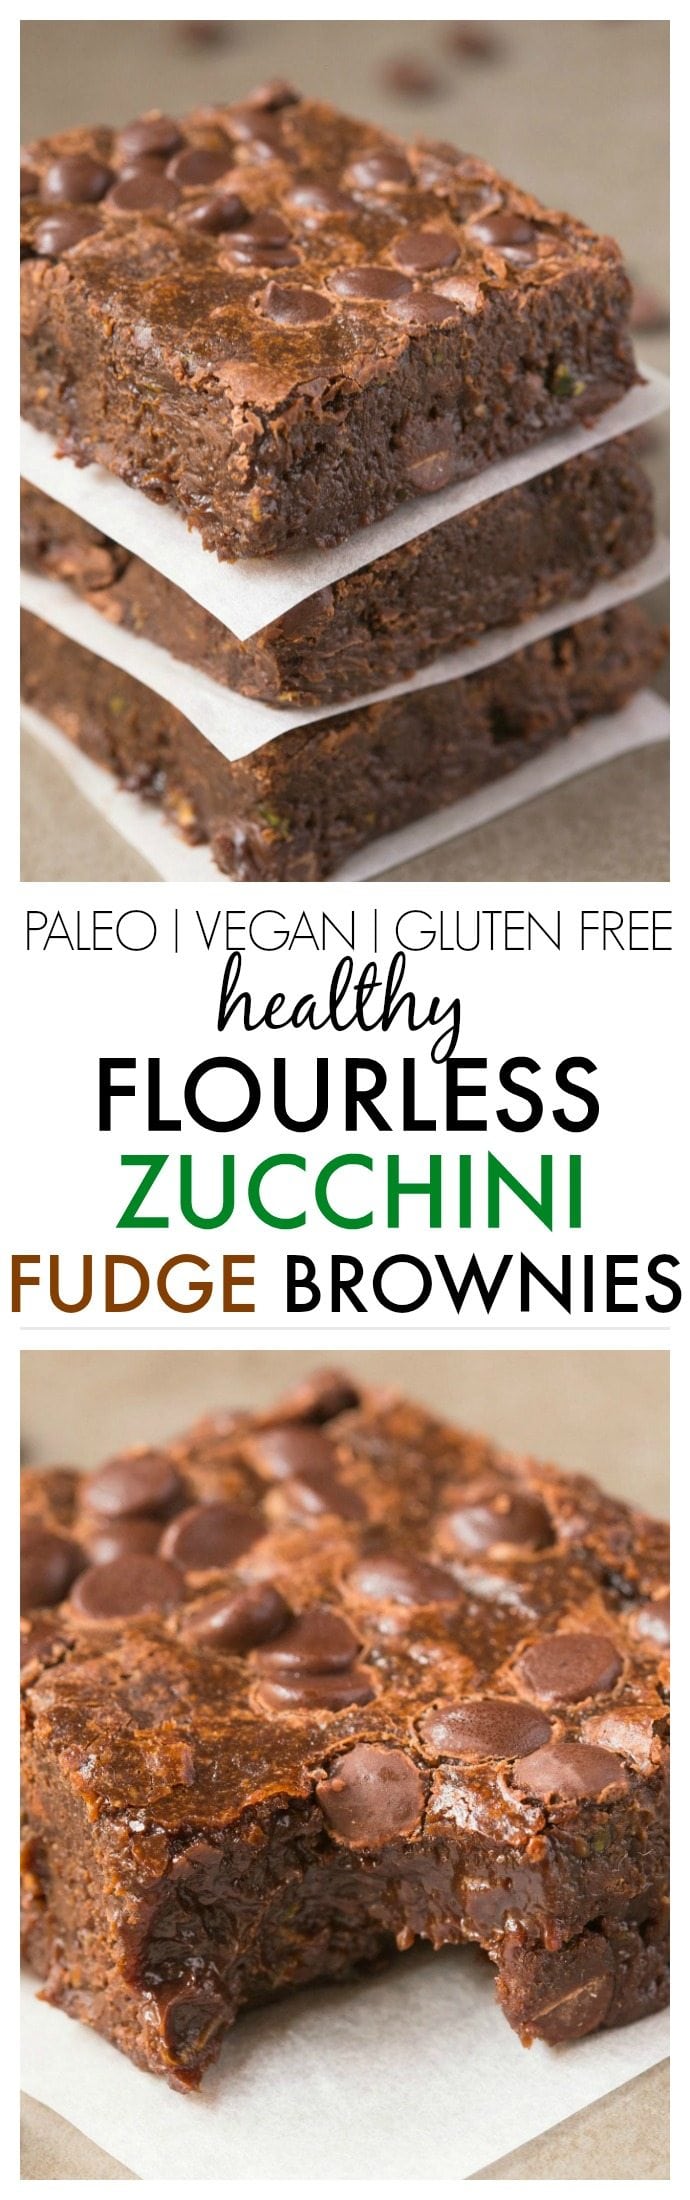 Healthy Flourless Zucchini Fudge Brownies made with NO butter and NO flour and ridiculously easy- Hands down, BEST brownies ever! {vegan, gluten free, paleo recipe}- thebigmansworld.com